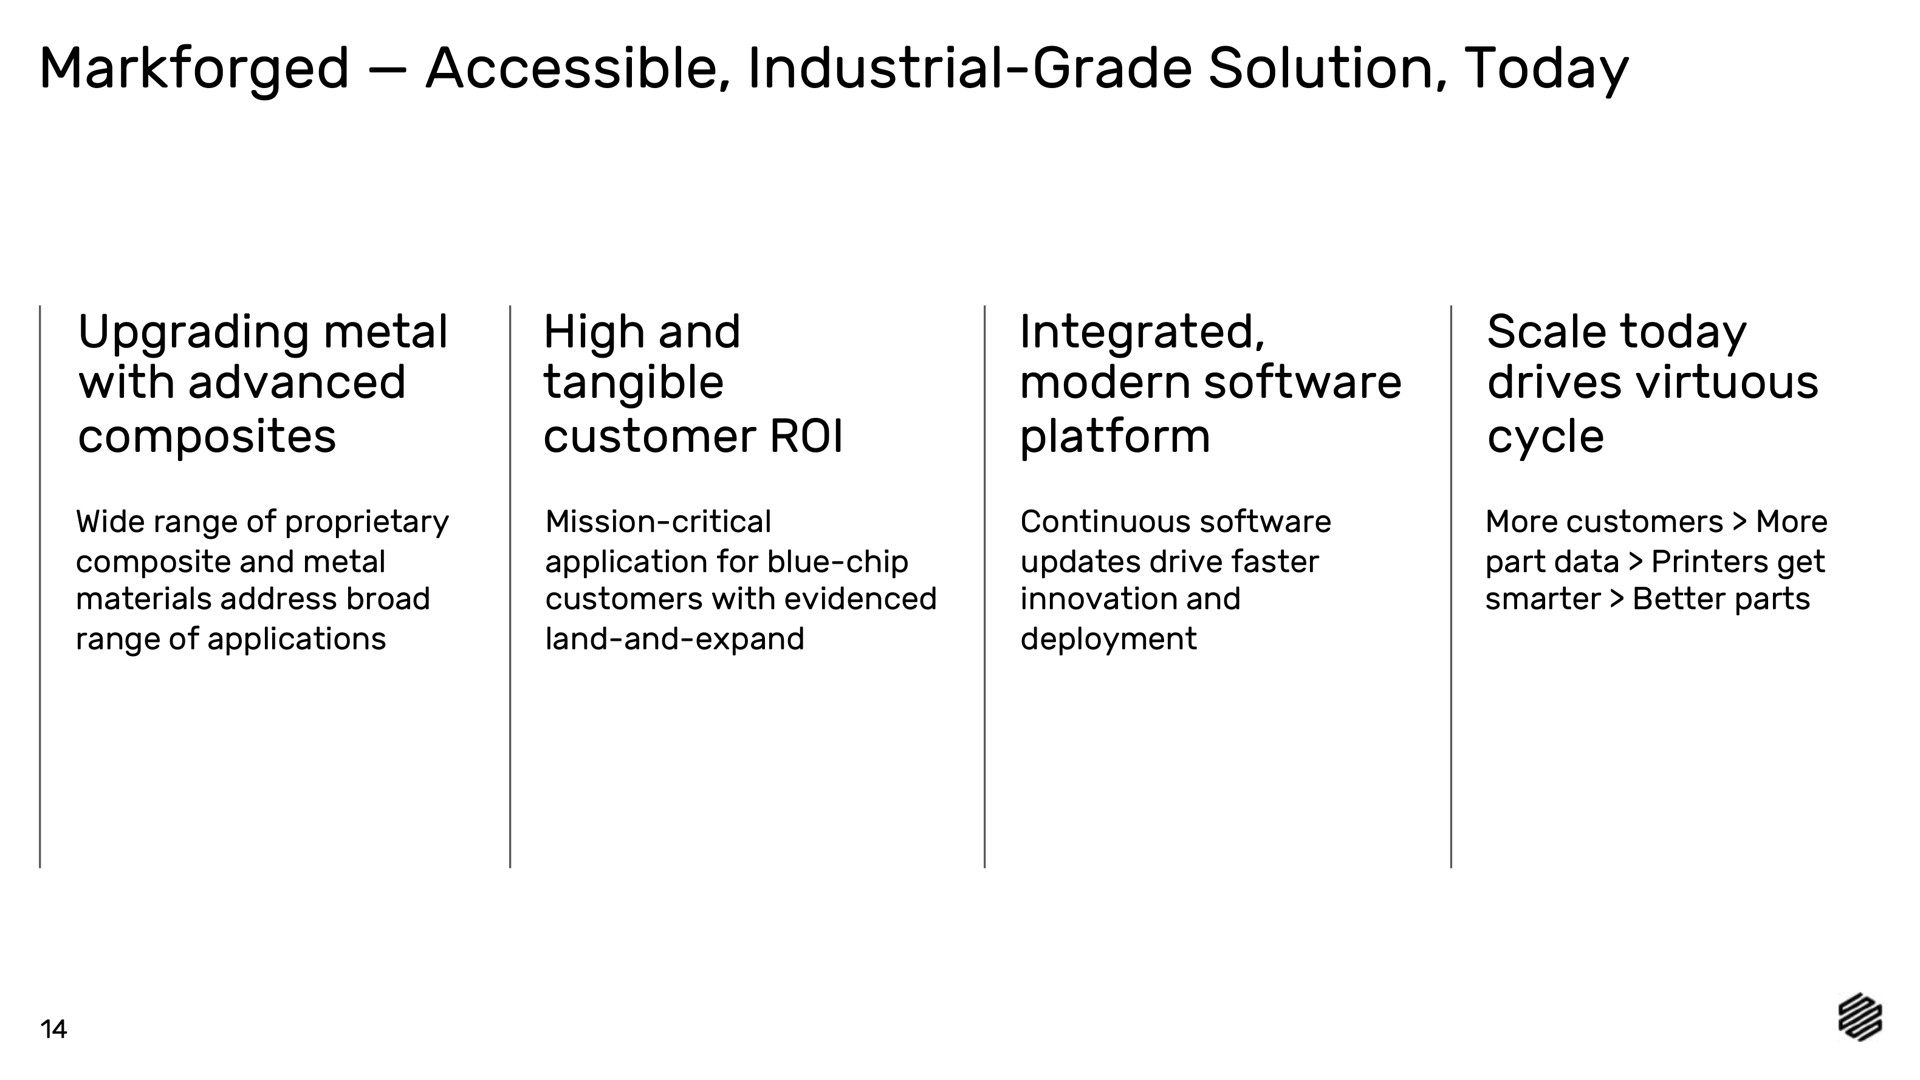 accessible industrial grade solution today upgrading metal with advanced composites high and tangible customer roi integrated modern platform scale today drives virtuous cycle | Markforged